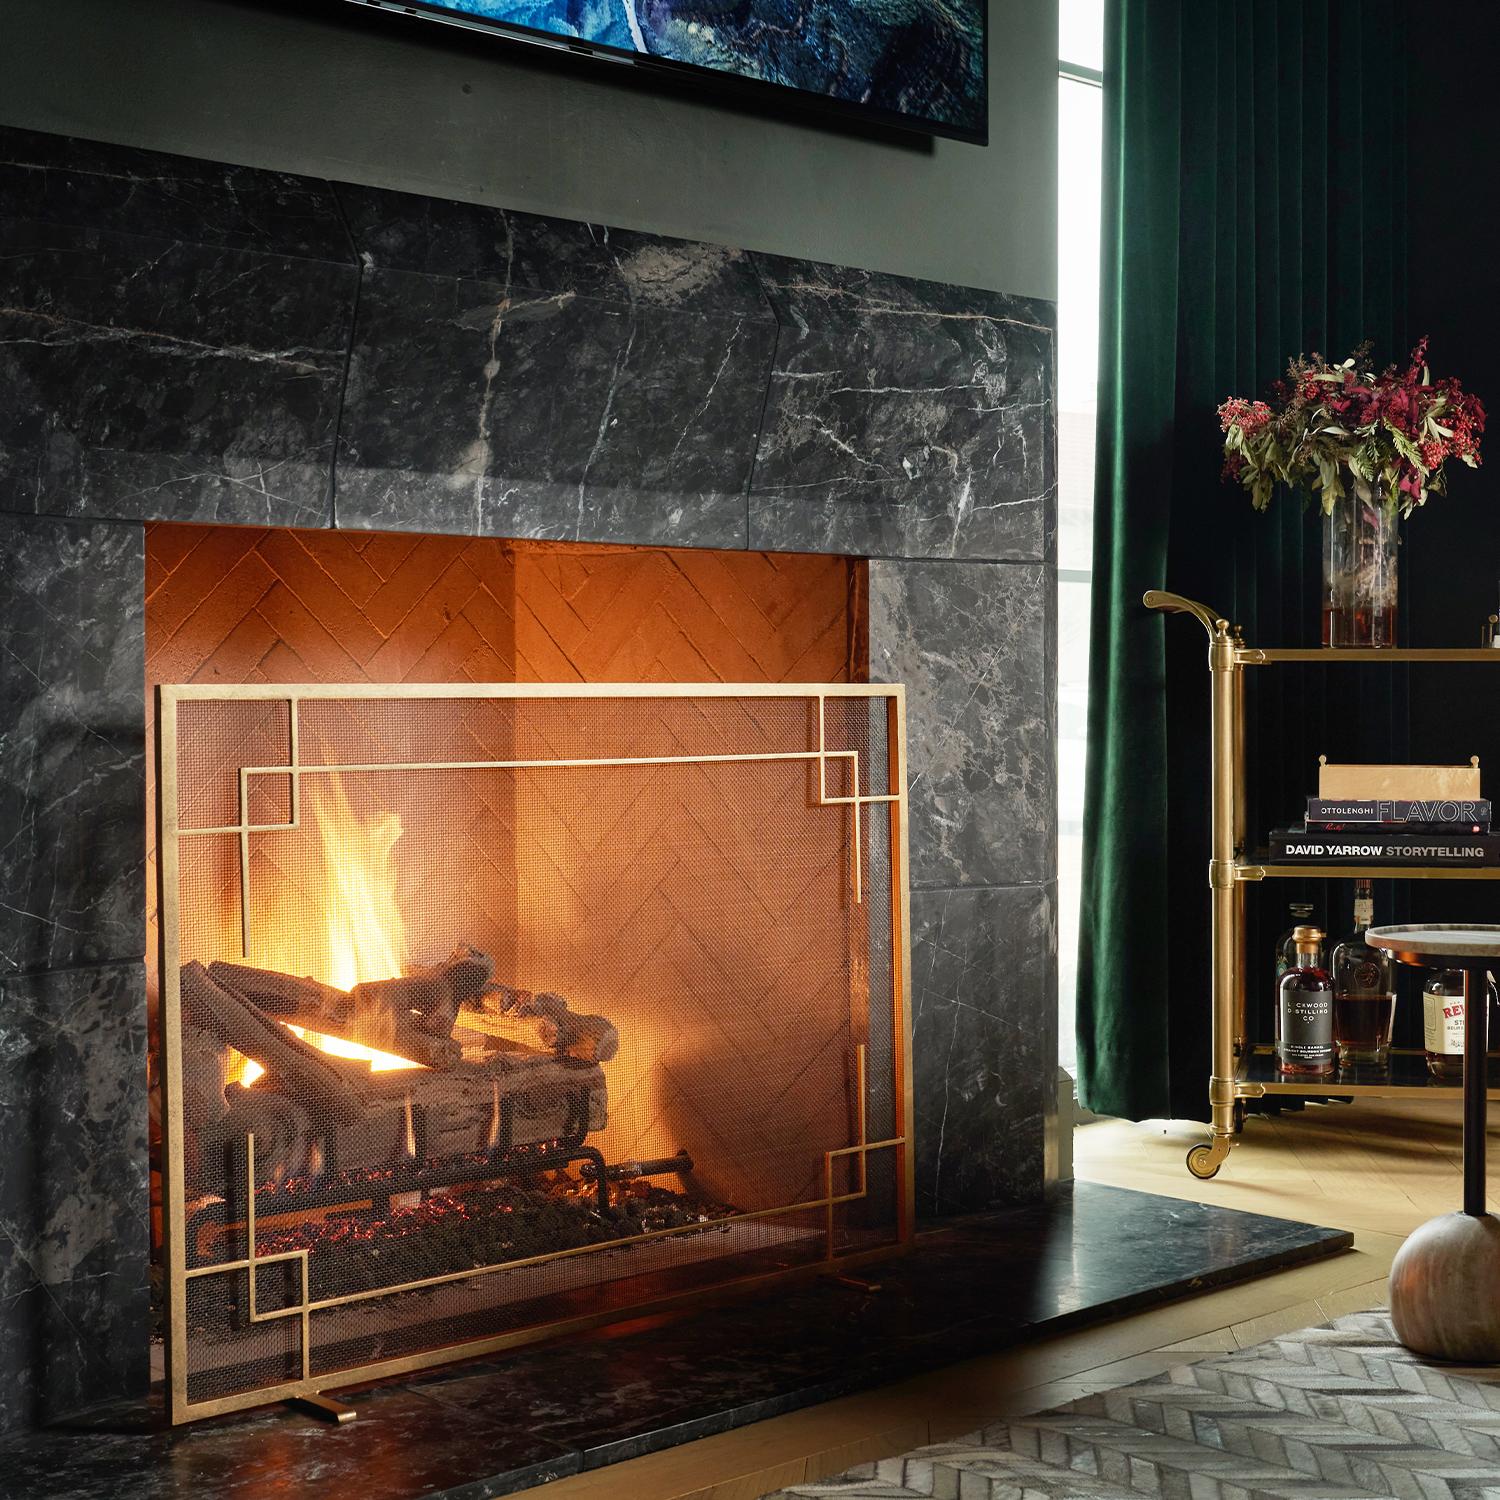 Minimalist and modern, Evelynne combines traditional metal artistry and contemporary elegance. This timeless design adds a layer of luxe to the fireplace of the modern home. Sculptural yet restrained, Evelynne was inspired by minimalist linear forms